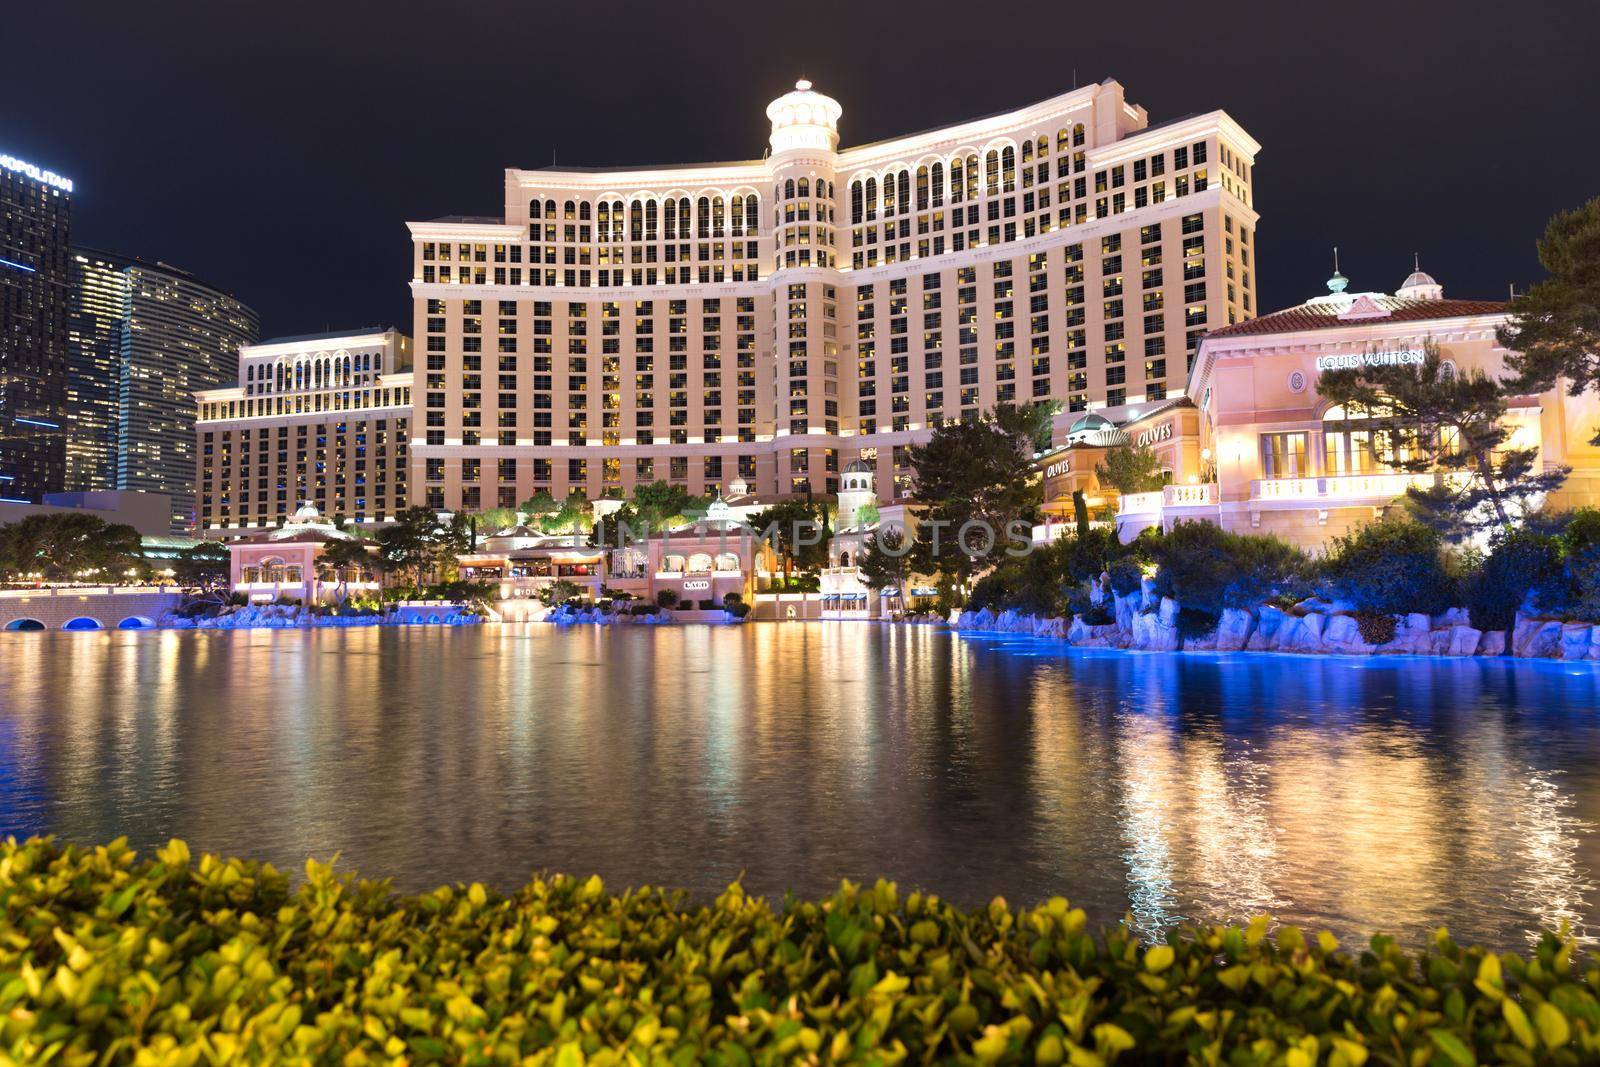 LAS VEGAS, NEVADA - MAY 29: Bellagio hotel on May 29, 2015 in Las Vegas, Nevada,USA. Bellagio is a luxurious hotel famous with its fountains by Mariakray